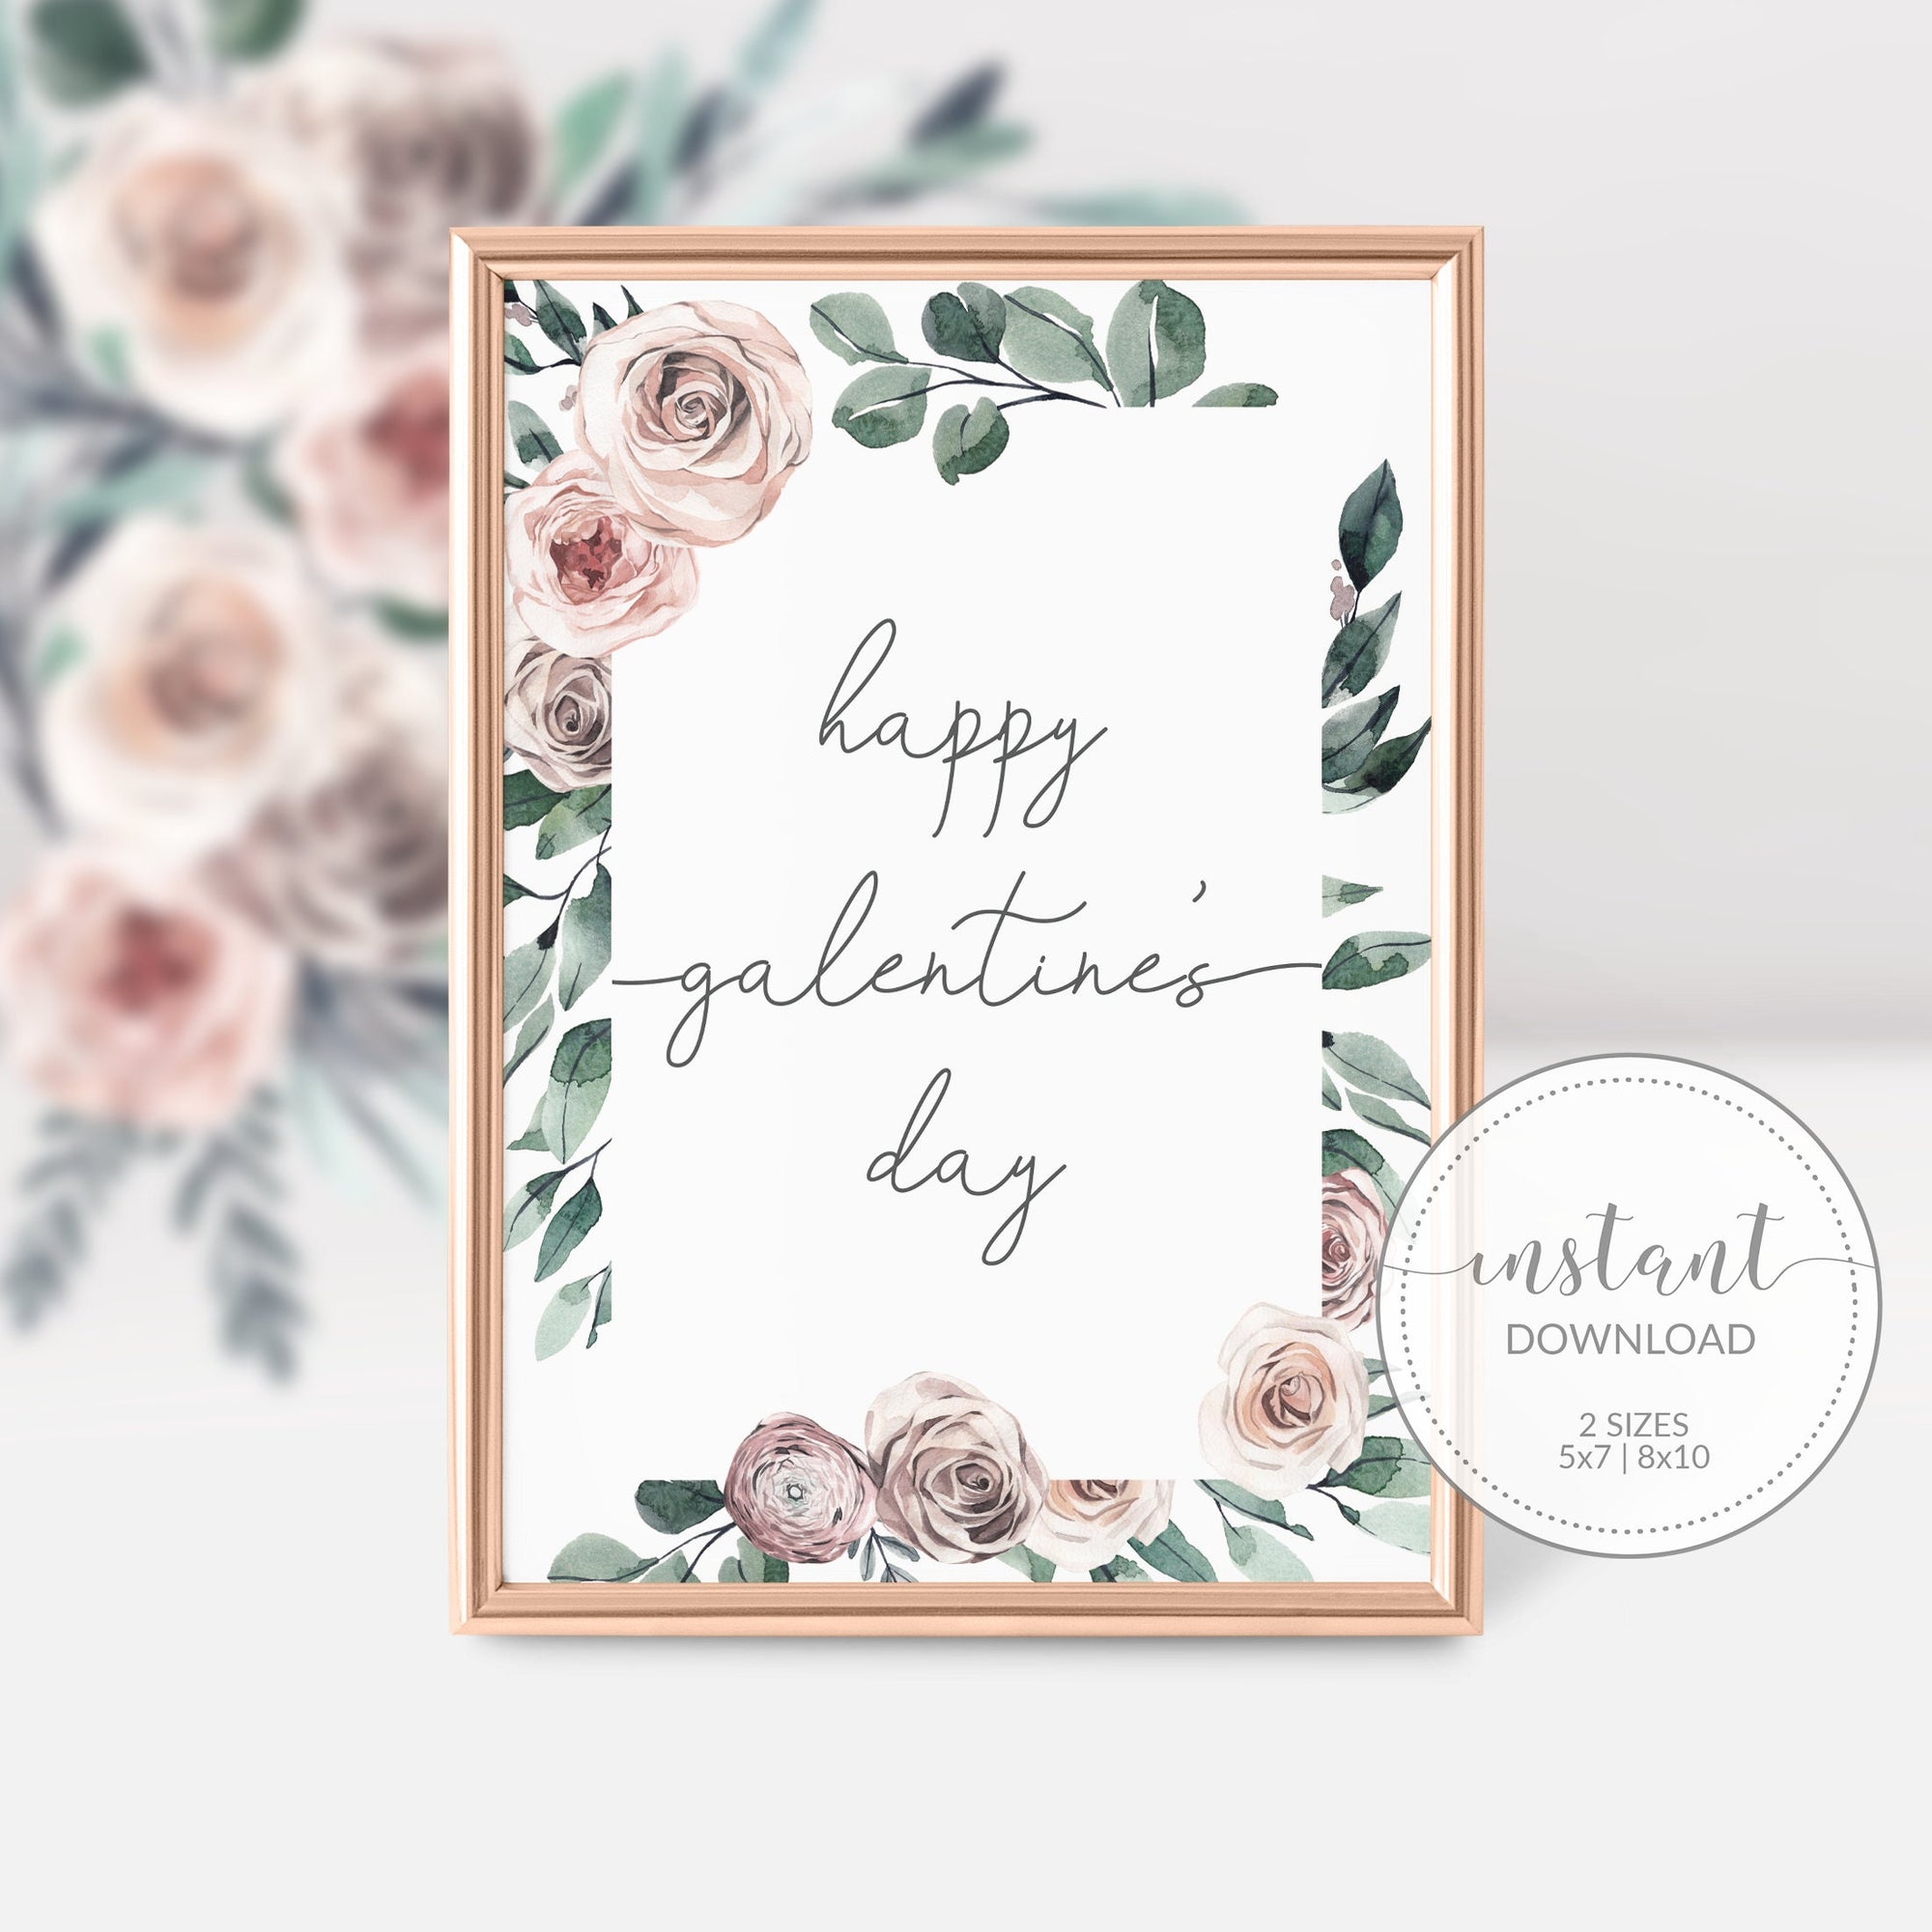 Happy Galentines Day Sign Printable, Galentines Day Decor, Galentines Day Party Decorations, Galentines Party Sign, INSTANT DOWNLOAD - BR100